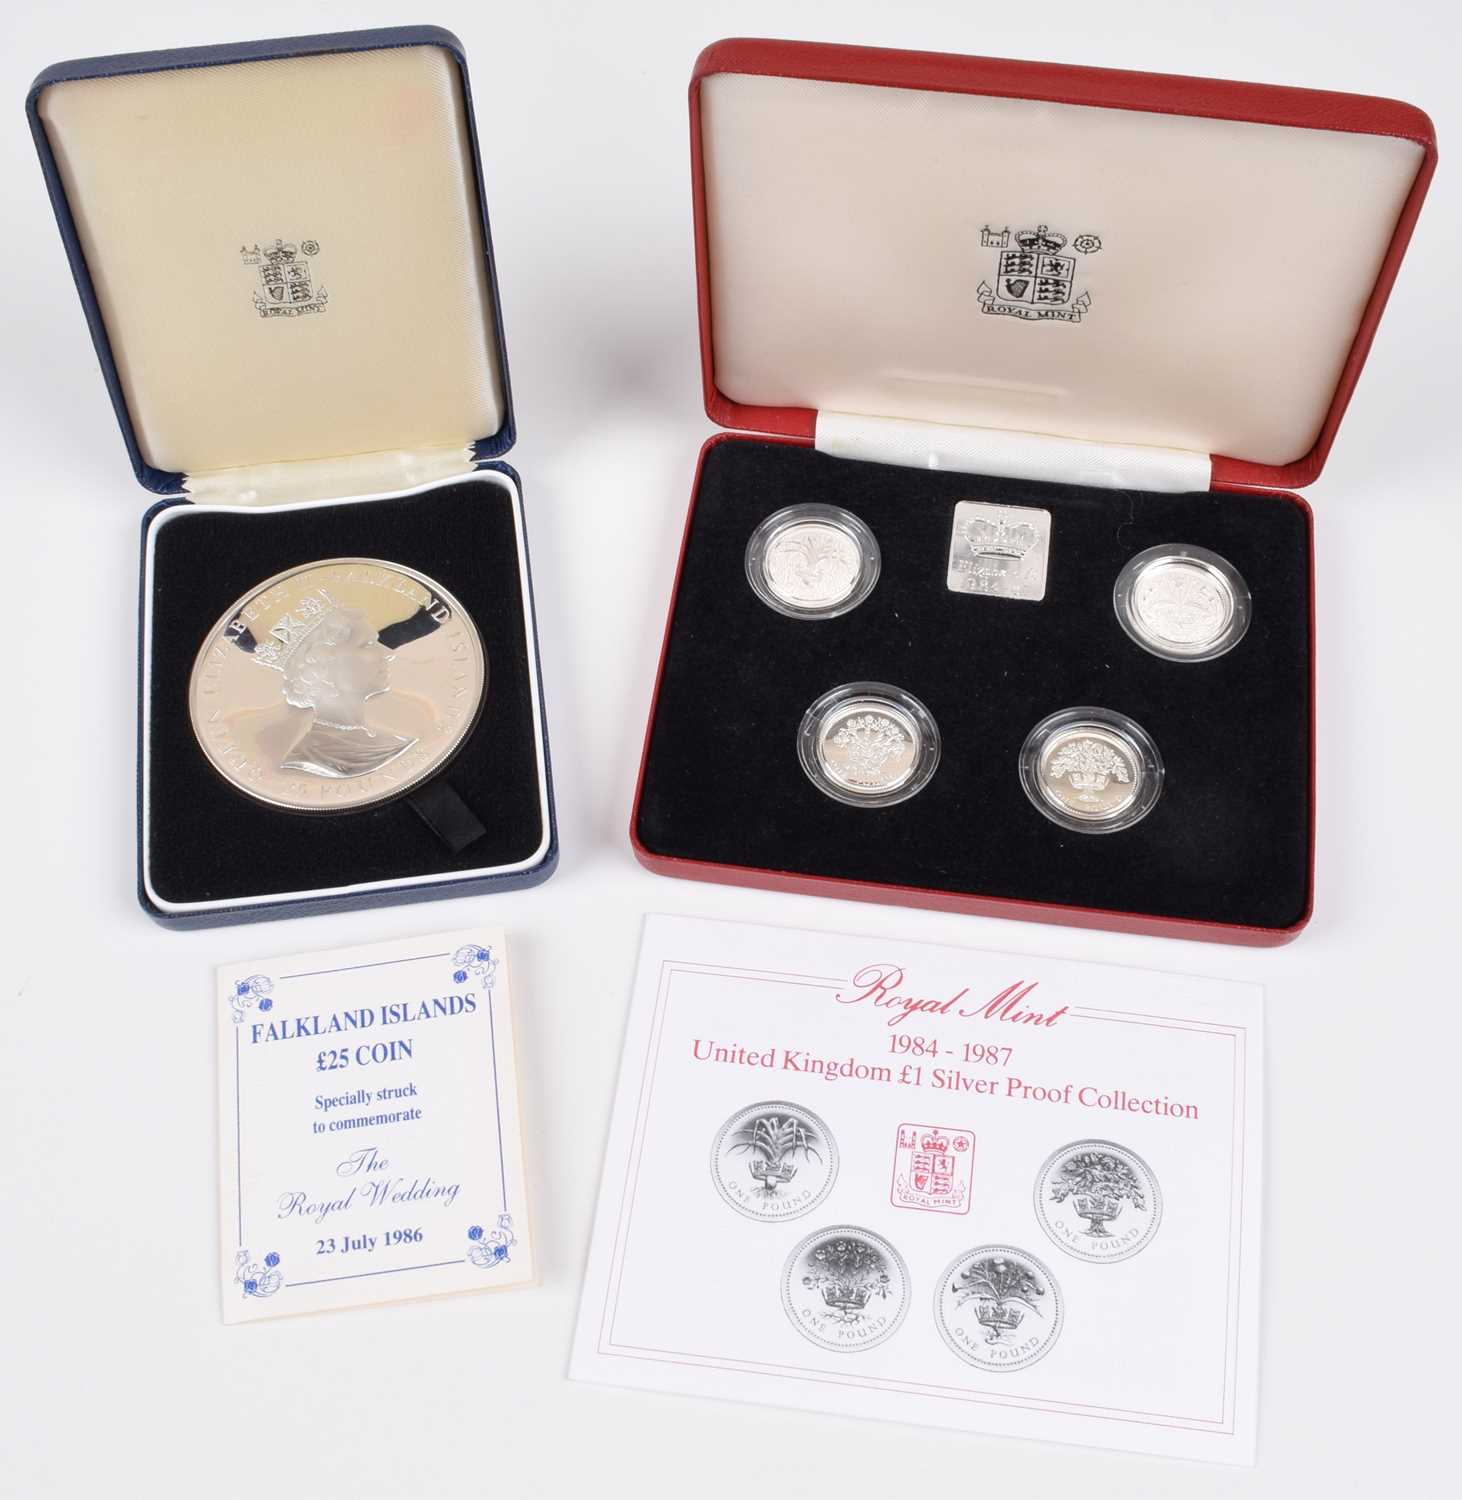 Lot 13 - Assortment of various Royal Mint Silver Proof Coins.